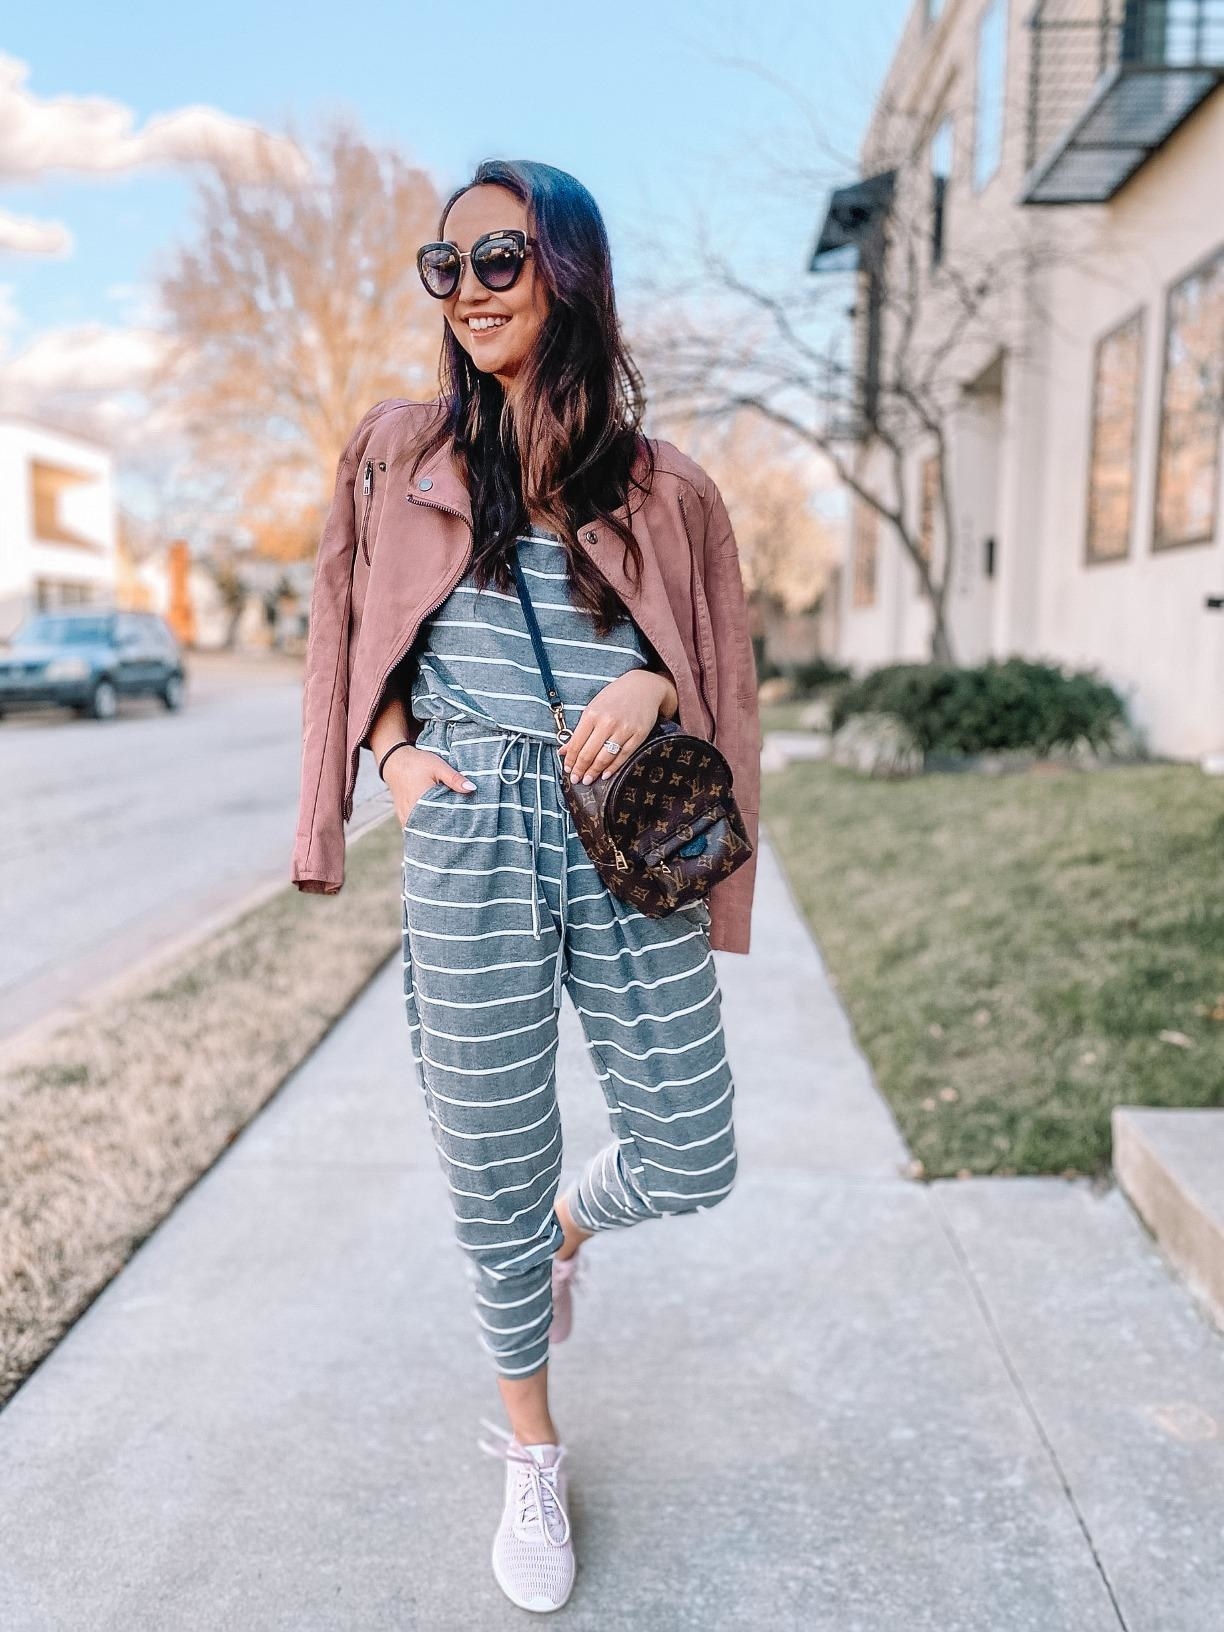 KBStyled | Stripe jumpsuit outfit, Jumpsuit with jacket, Jumpsuit outfit